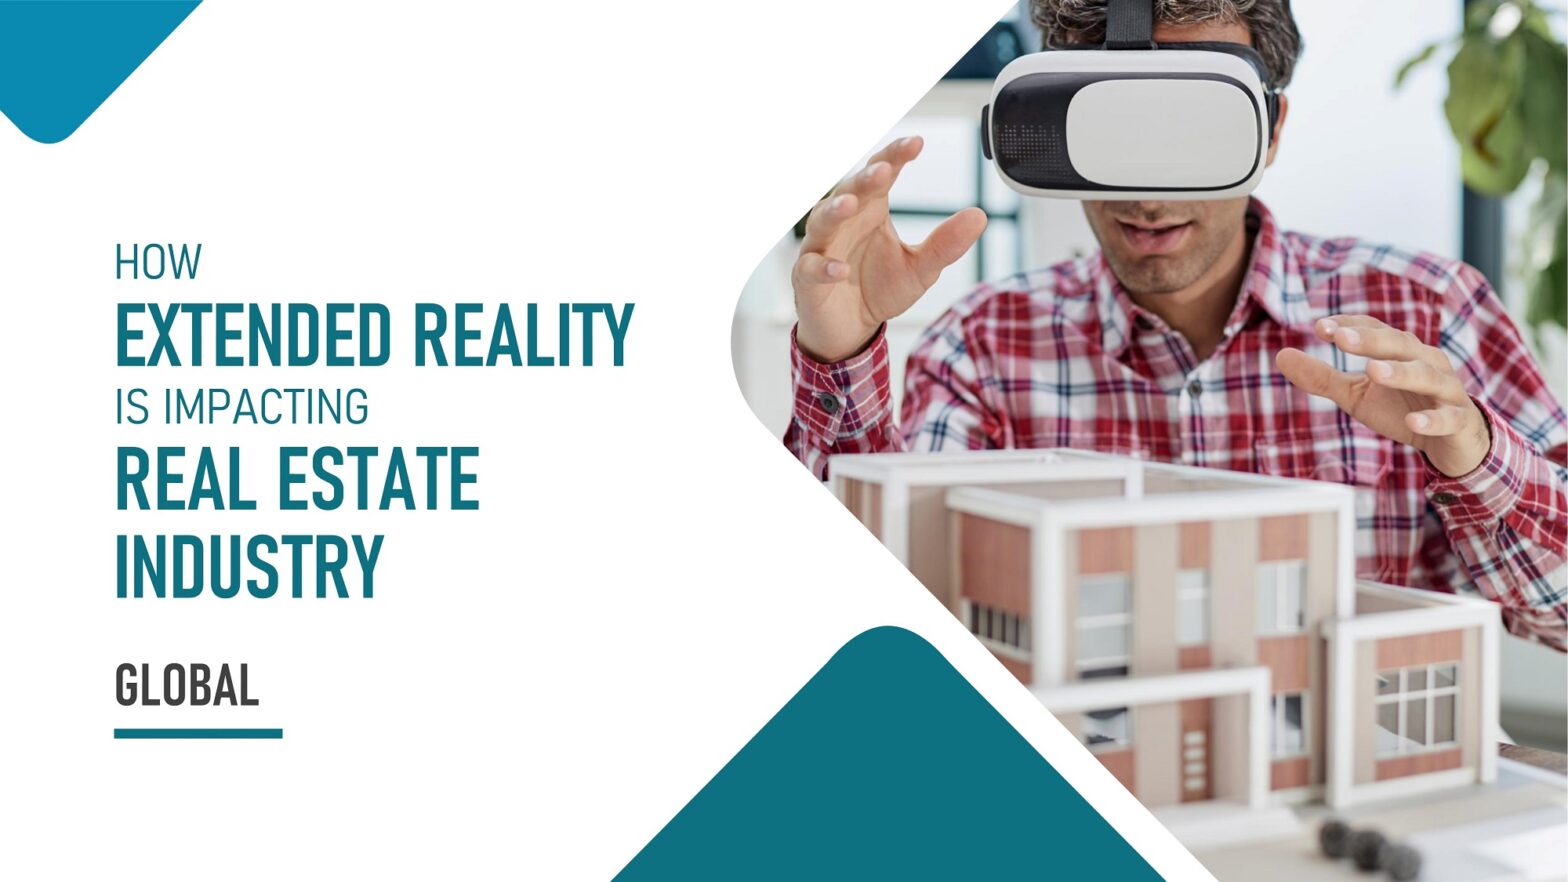 Discover the use cases of Extended Reality (XR) in the real estate industry.